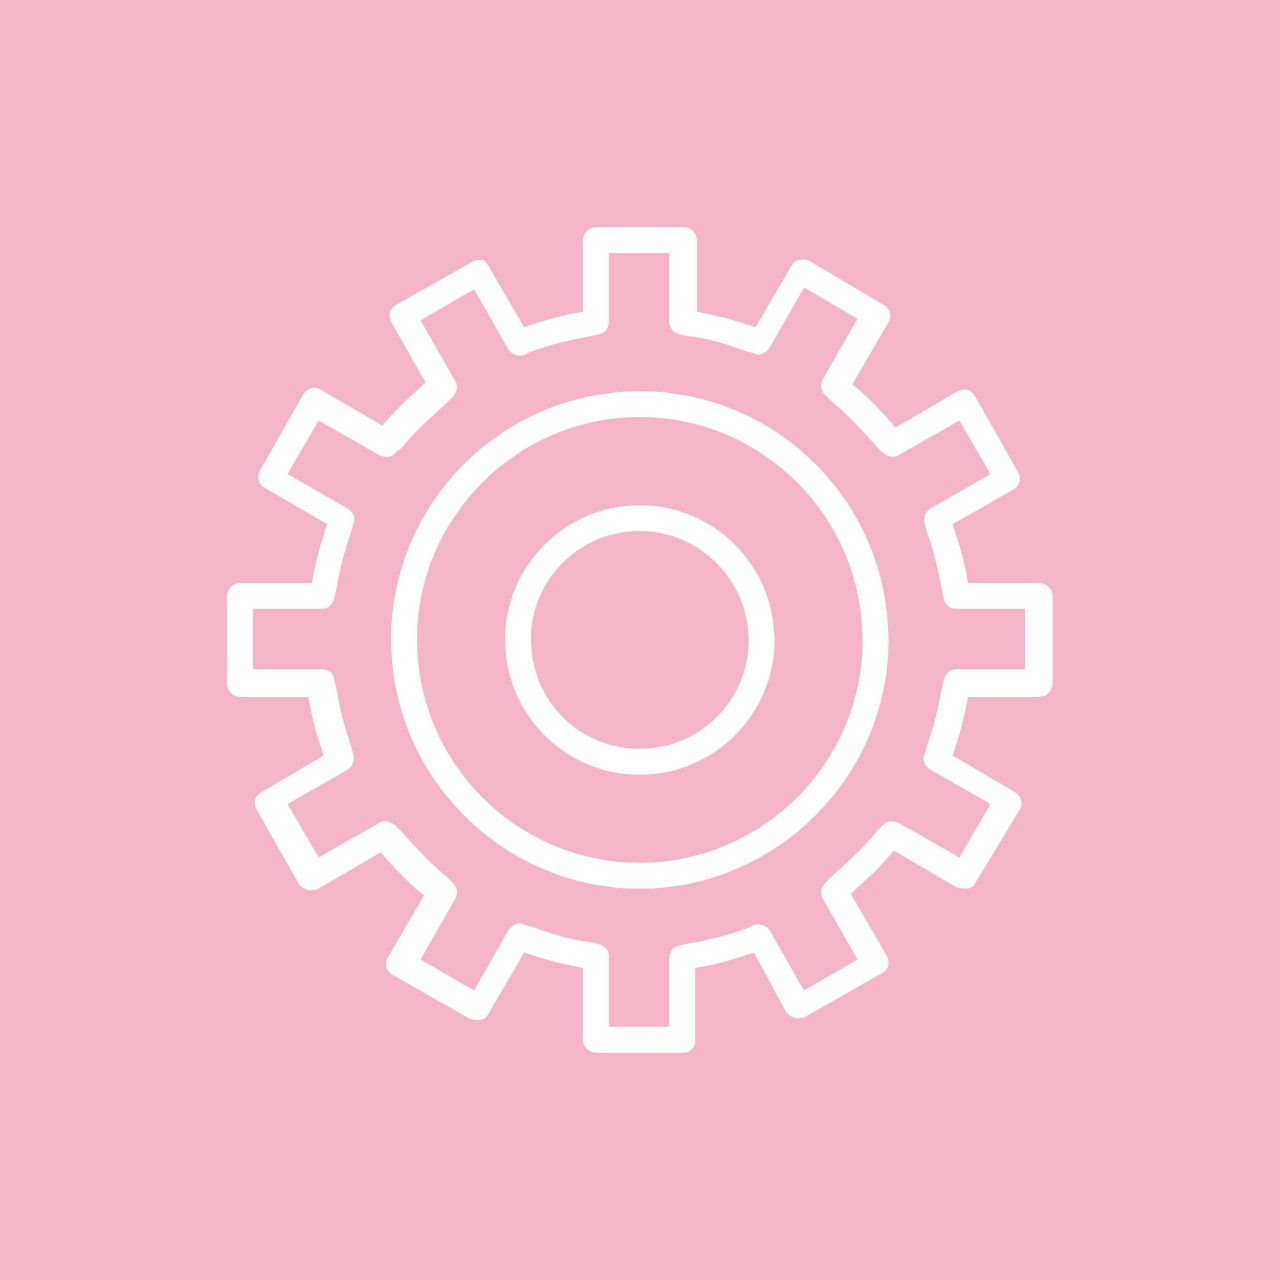 settings_icon_bwt-pink_1280x1280.png